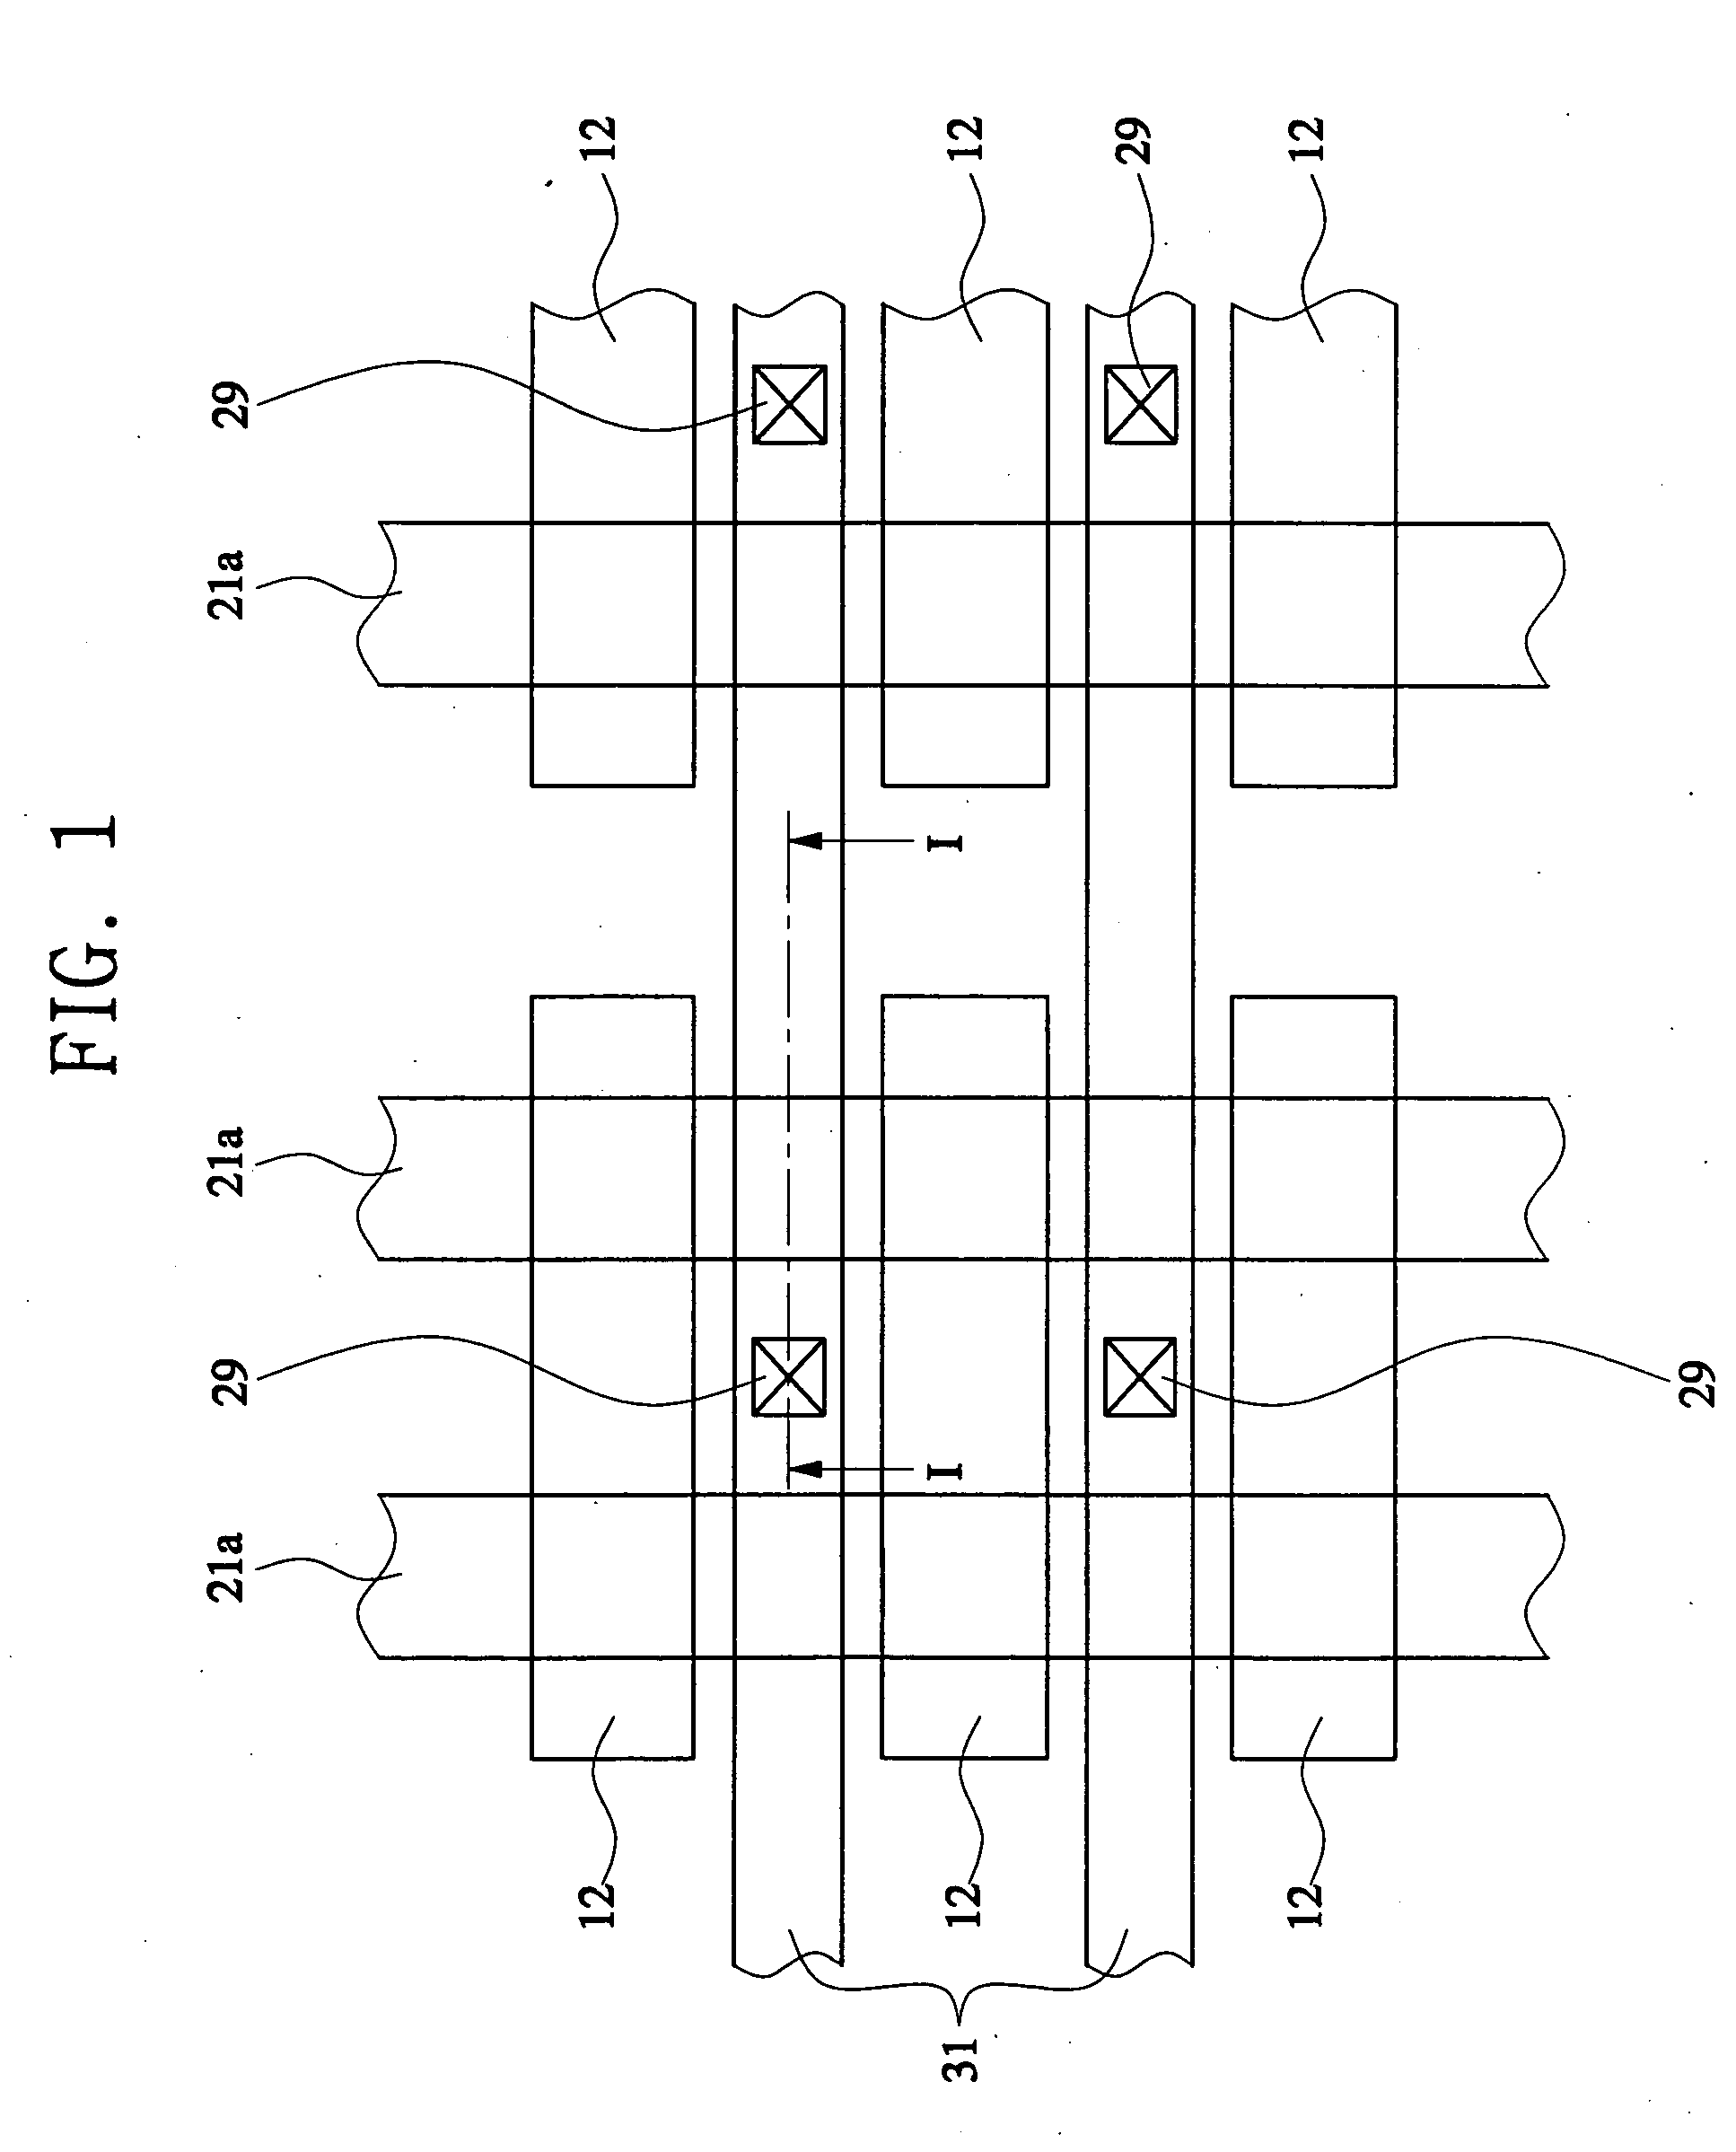 Nonvolatile memory cell employing a plurality of dielectric nanoclusters and method of fabricating the same